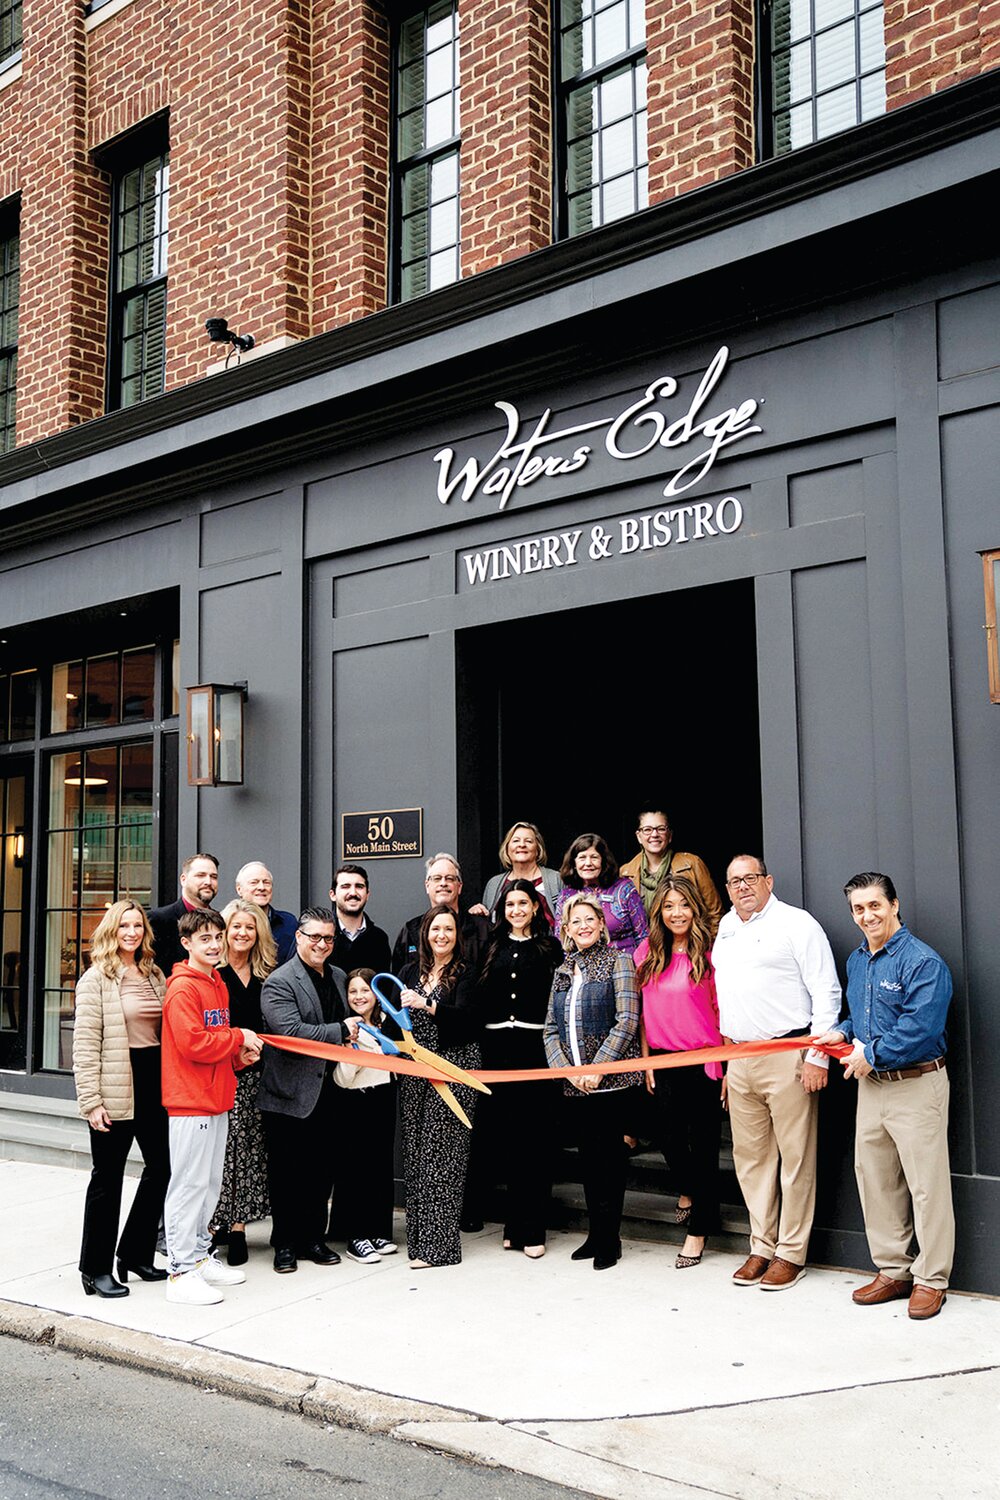 An official ribbon cutting for Waters Edge Winery & Bistro was held March 7.